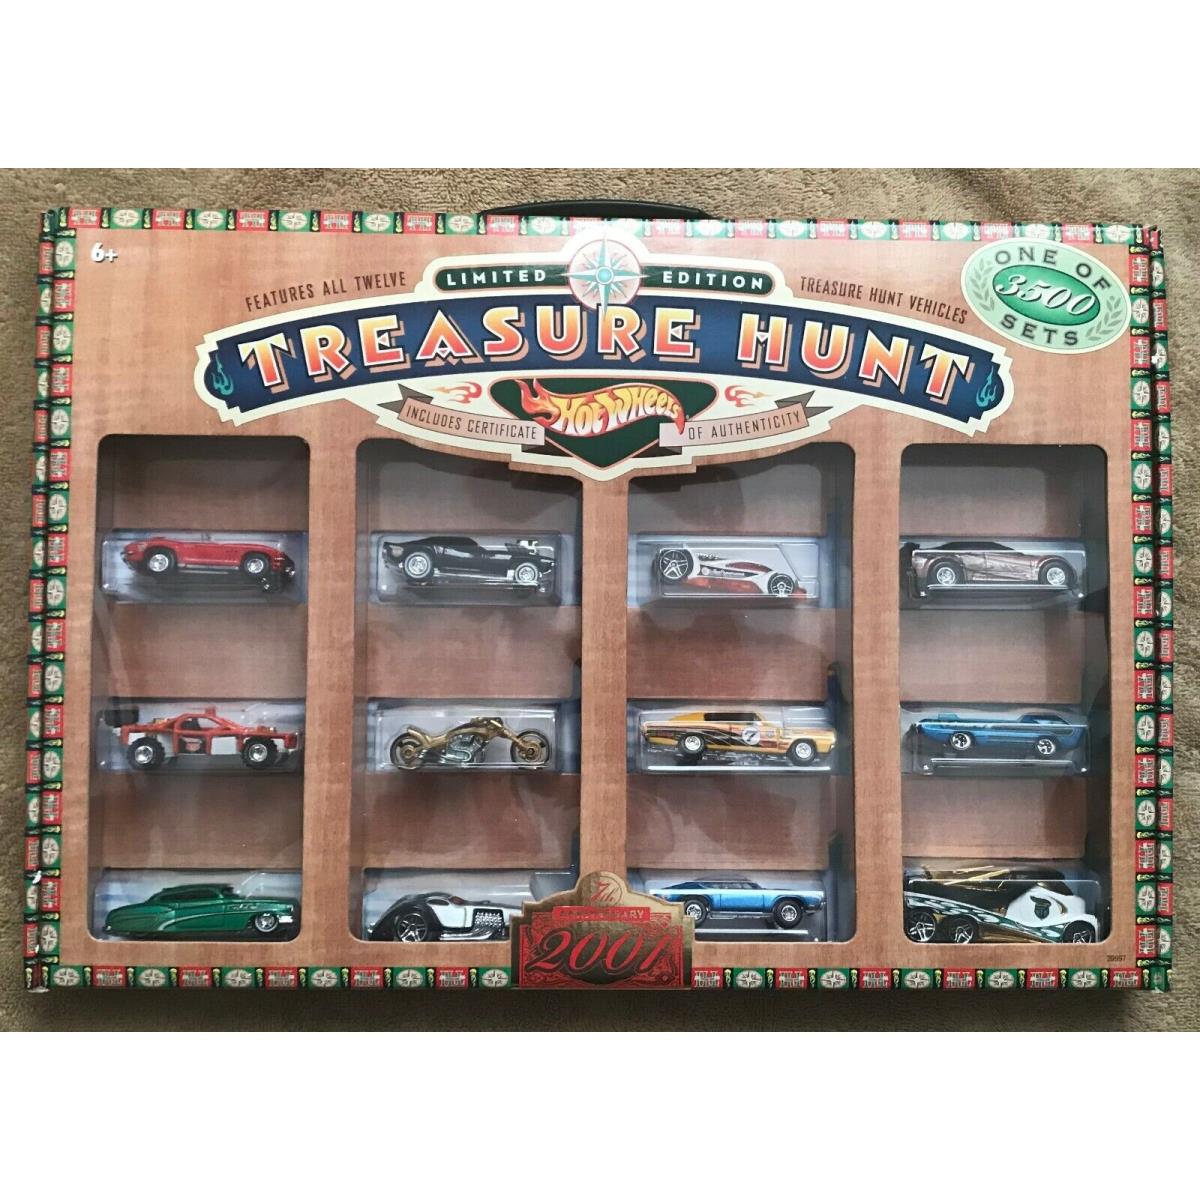 2001 Hot Wheels Treasure Hunt Set JC Penney Exclusive Limited Edition 1 Of 3500